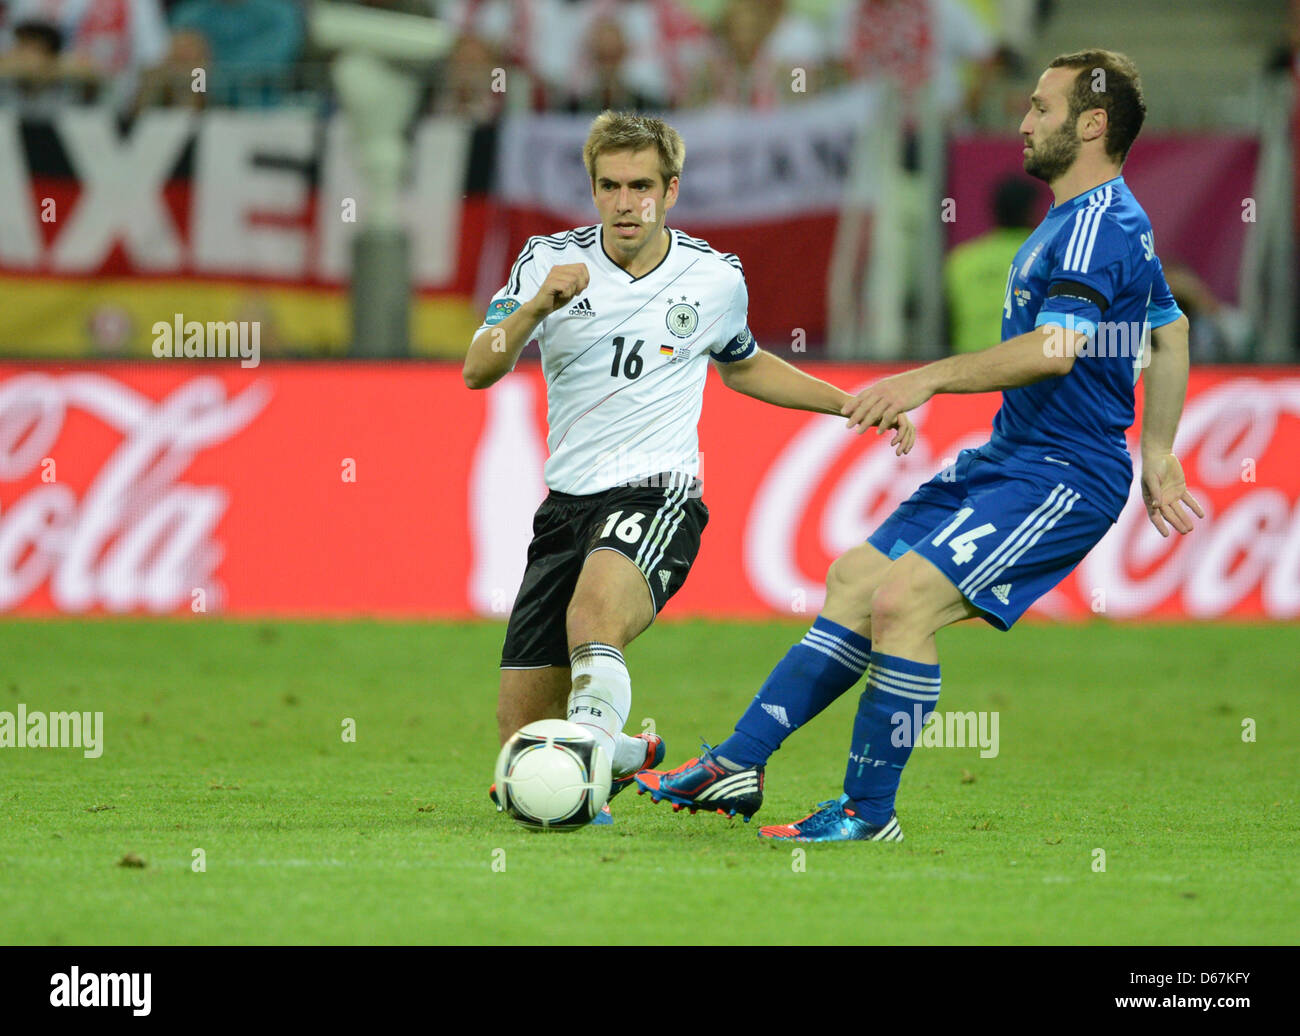 Germany's Philipp Lahm (L) and Greece's Dimitris Salpingidis vie for the ball during the UEFA EURO 2012 quarter-final soccer match Germany vs Greece at Arena Gdansk in Gdansk, Poland, 22 June 2012. Photo: Andreas Gebert dpa (Please refer to chapters 7 and 8 of http://dpaq.de/Ziovh for UEFA Euro 2012 Terms & Conditions) Stock Photo